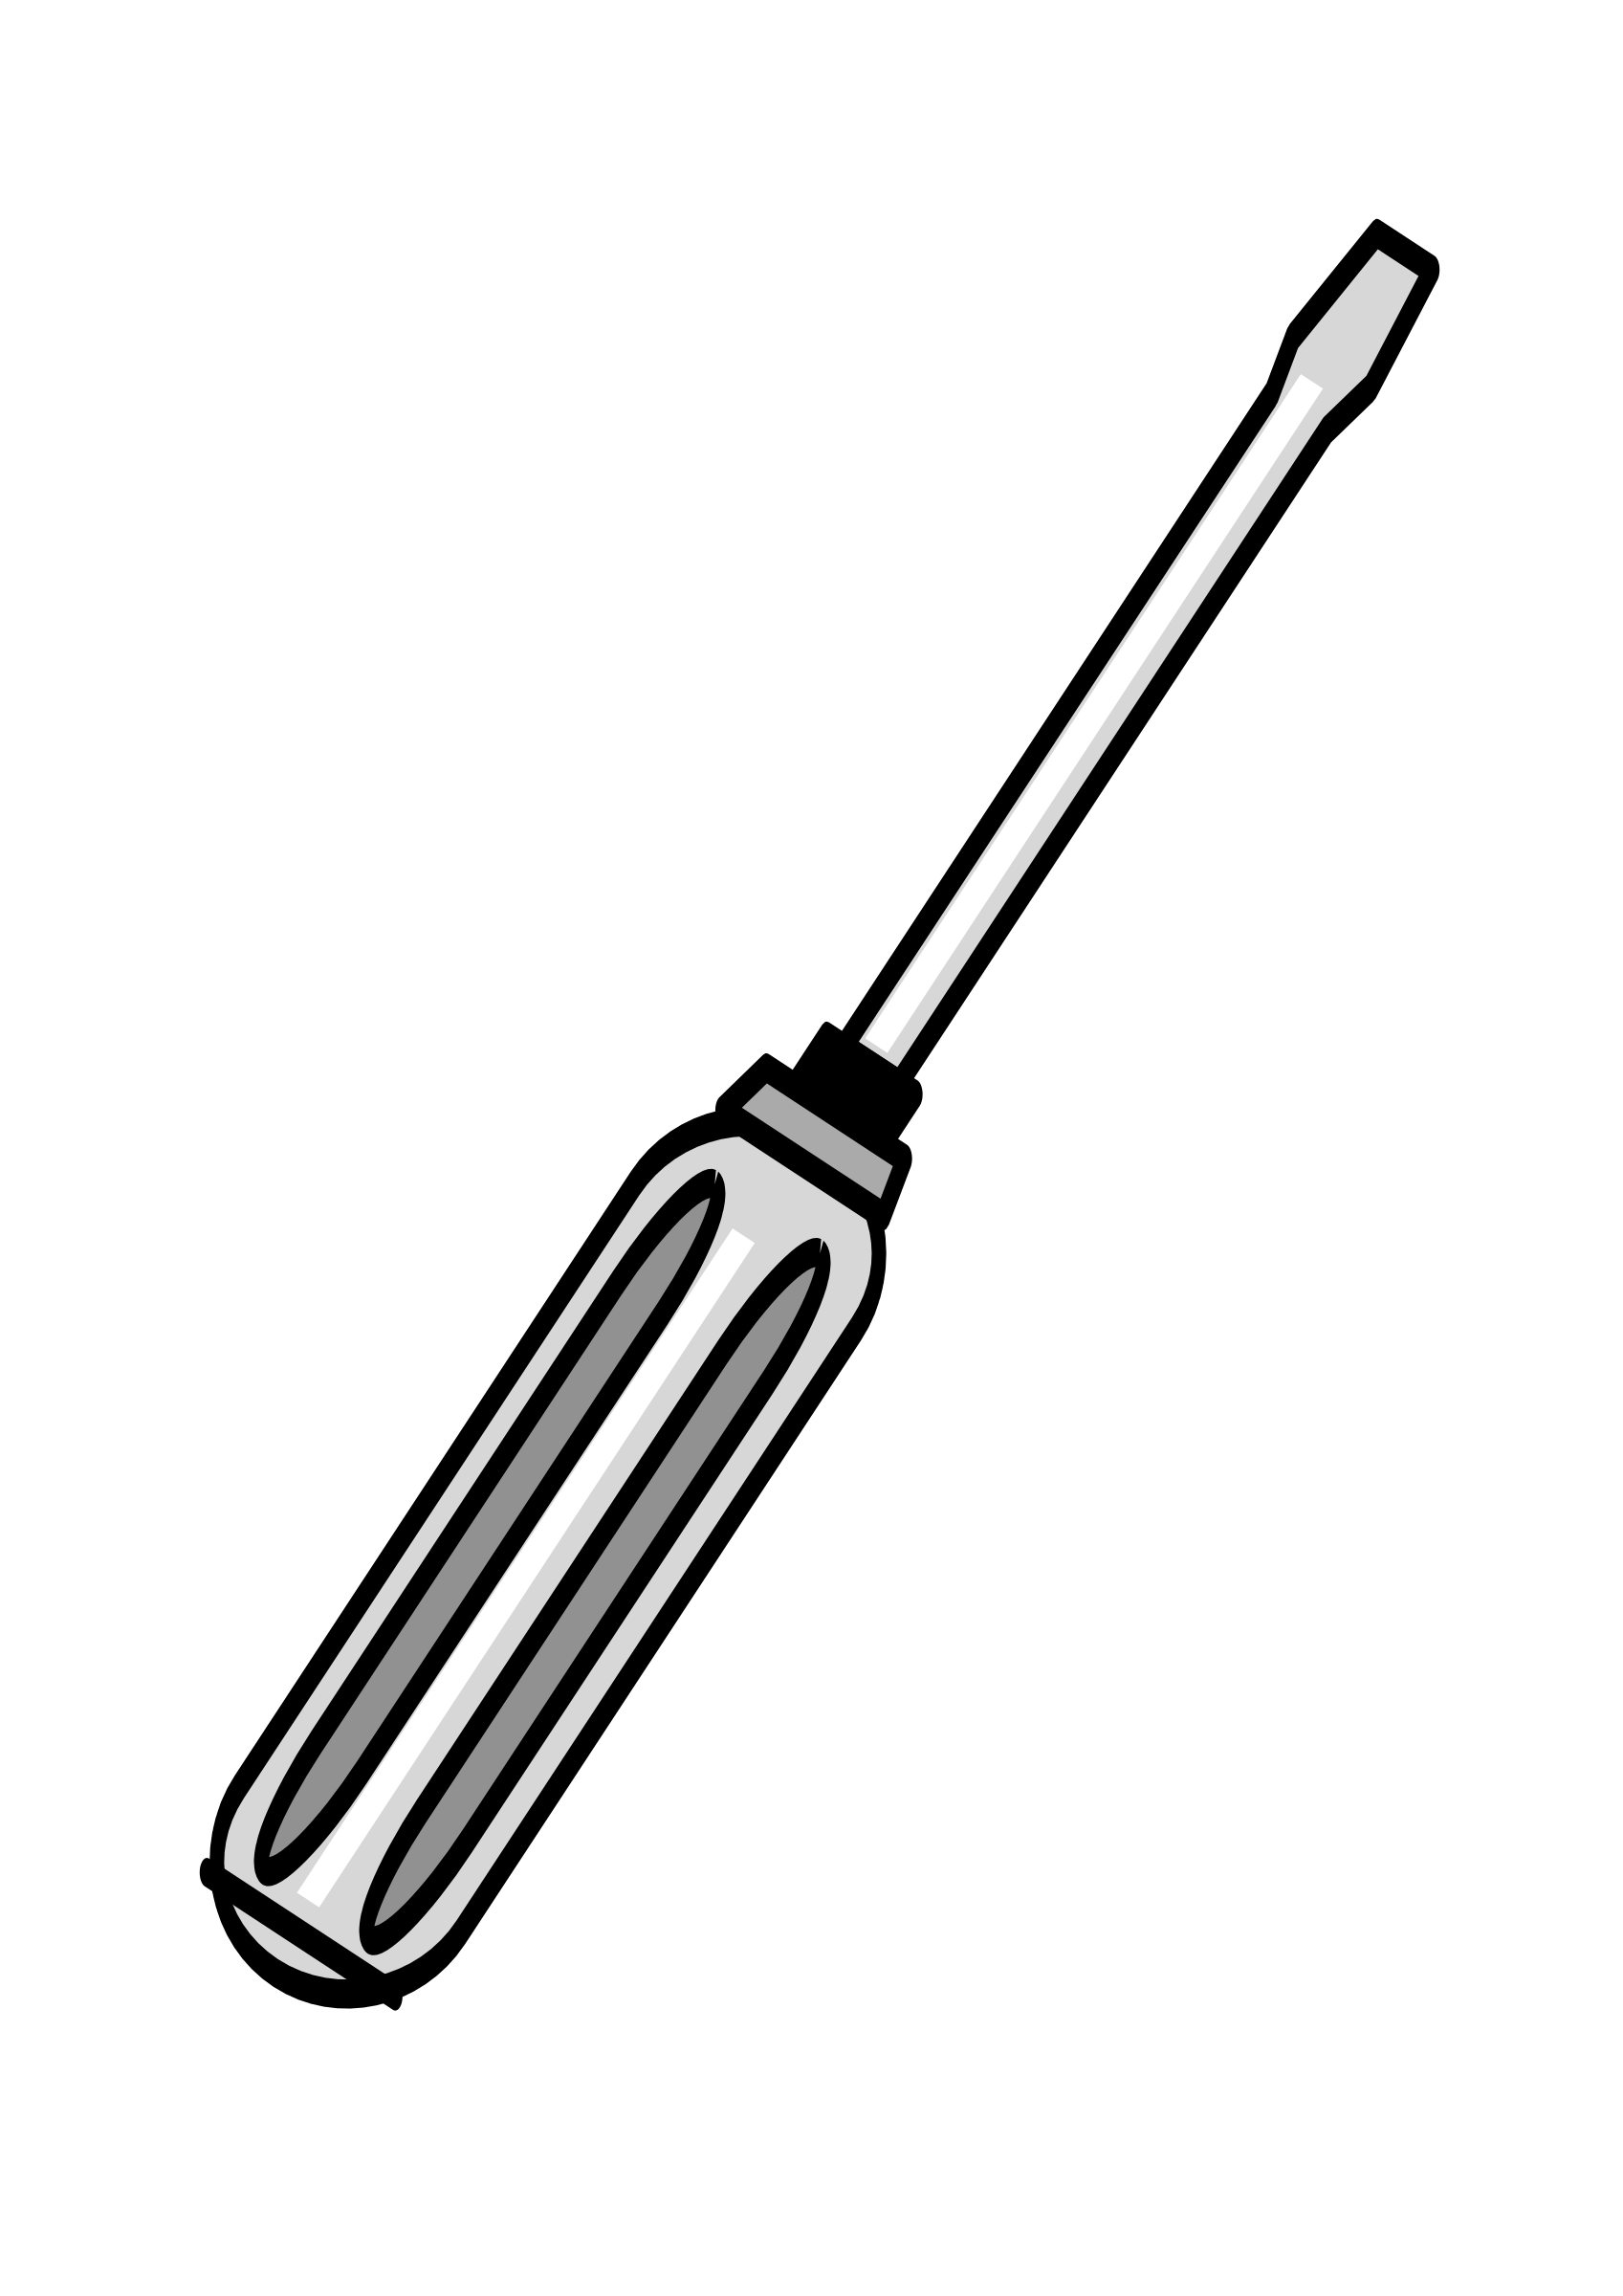 Screwdriver clipart black and white, Screwdriver black and